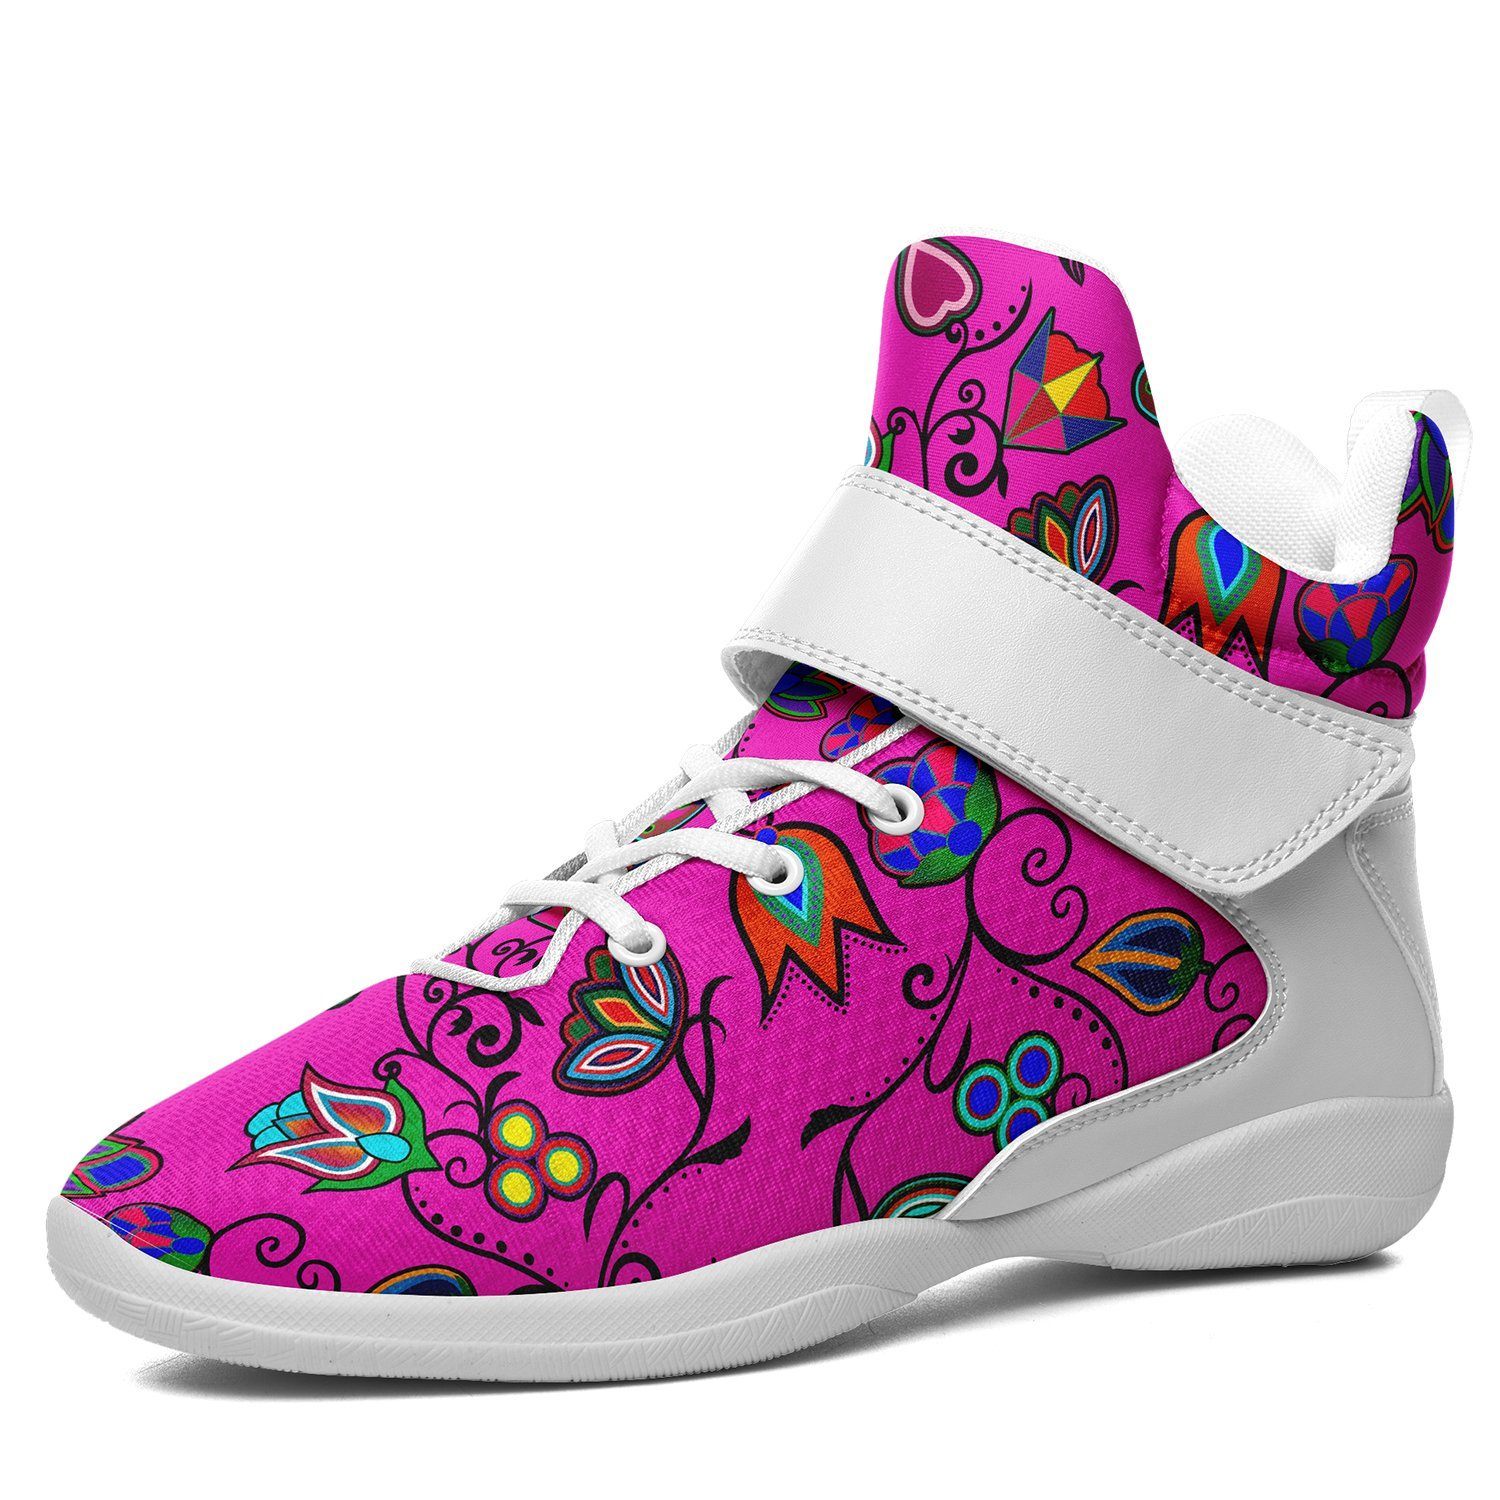 Indigenous Paisley Ipottaa Basketball / Sport High Top Shoes - White Sole 49 Dzine US Men 7 / EUR 40 White Sole with White Strap 